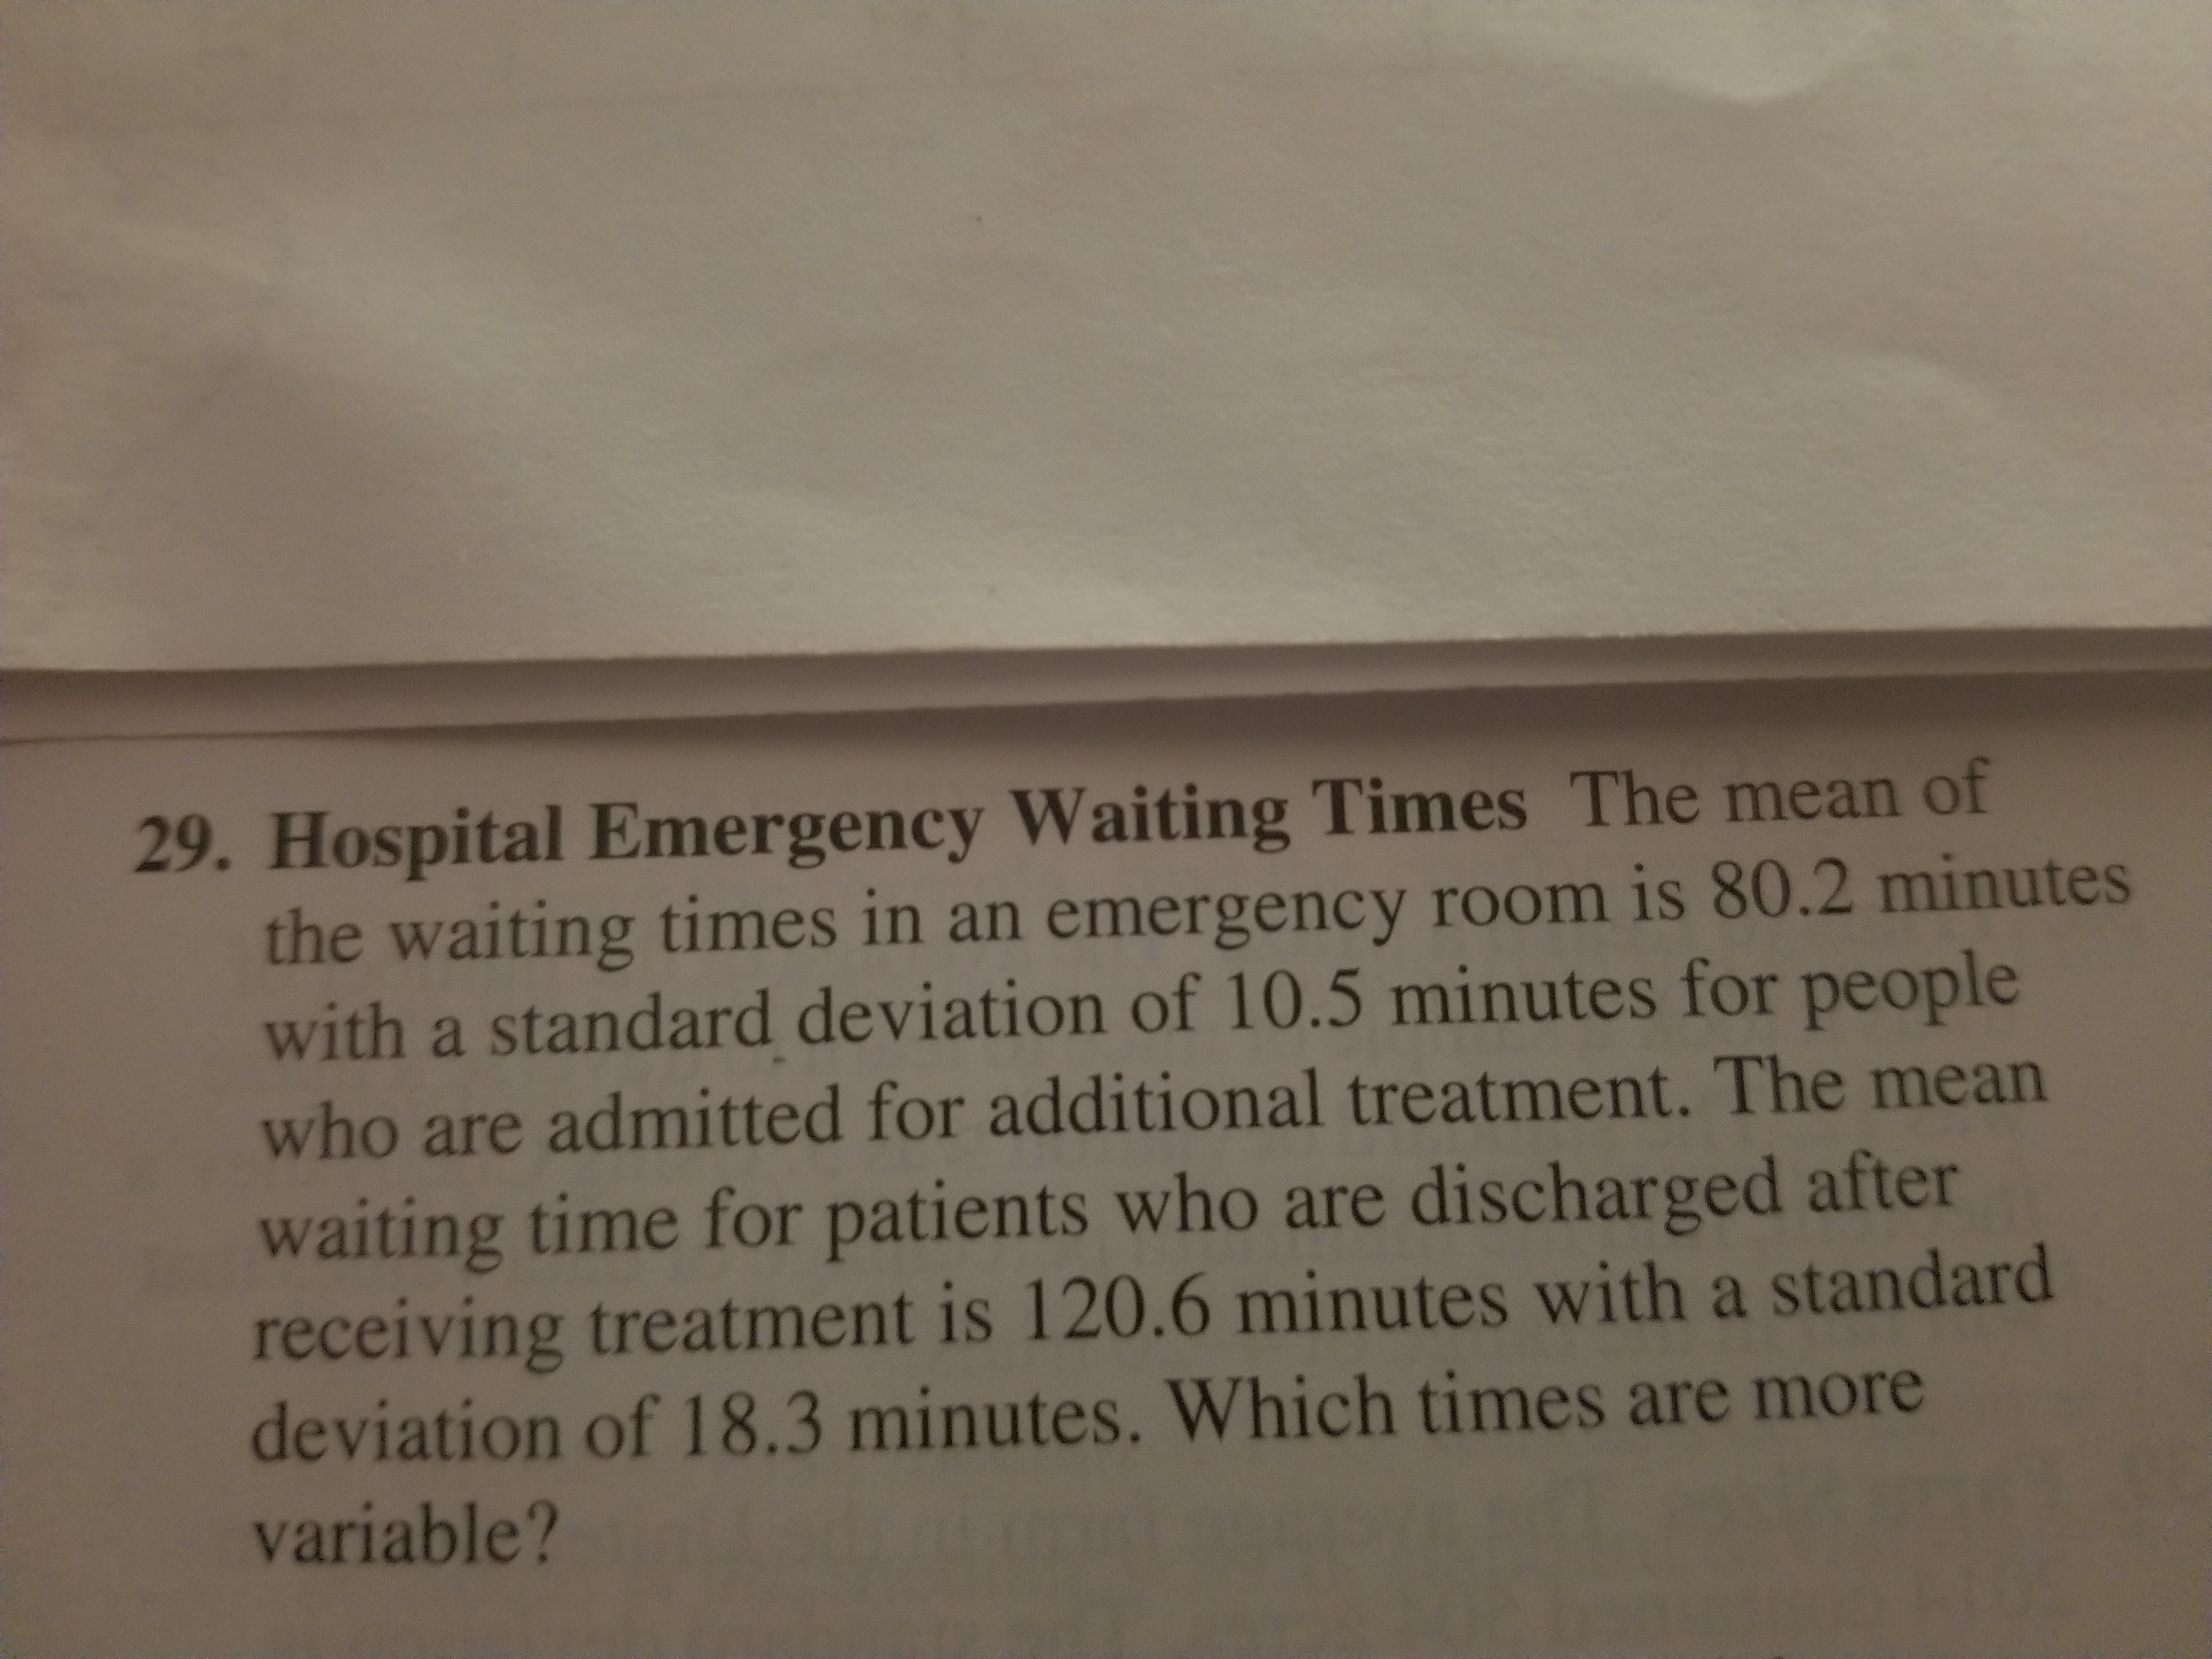 29. Hospital Emergency Waiting Times The mean of
the waiting times in an emergency room is 80.2 minutes
with a standard deviation of 10.5 minutes for people
who are admitted for additional treatment. The mean
waiting time for patients who are discharged after
receiving treatment is 120.6 minutes with a standard
deviation of 18.3 minutes. Which times are more
variable?
